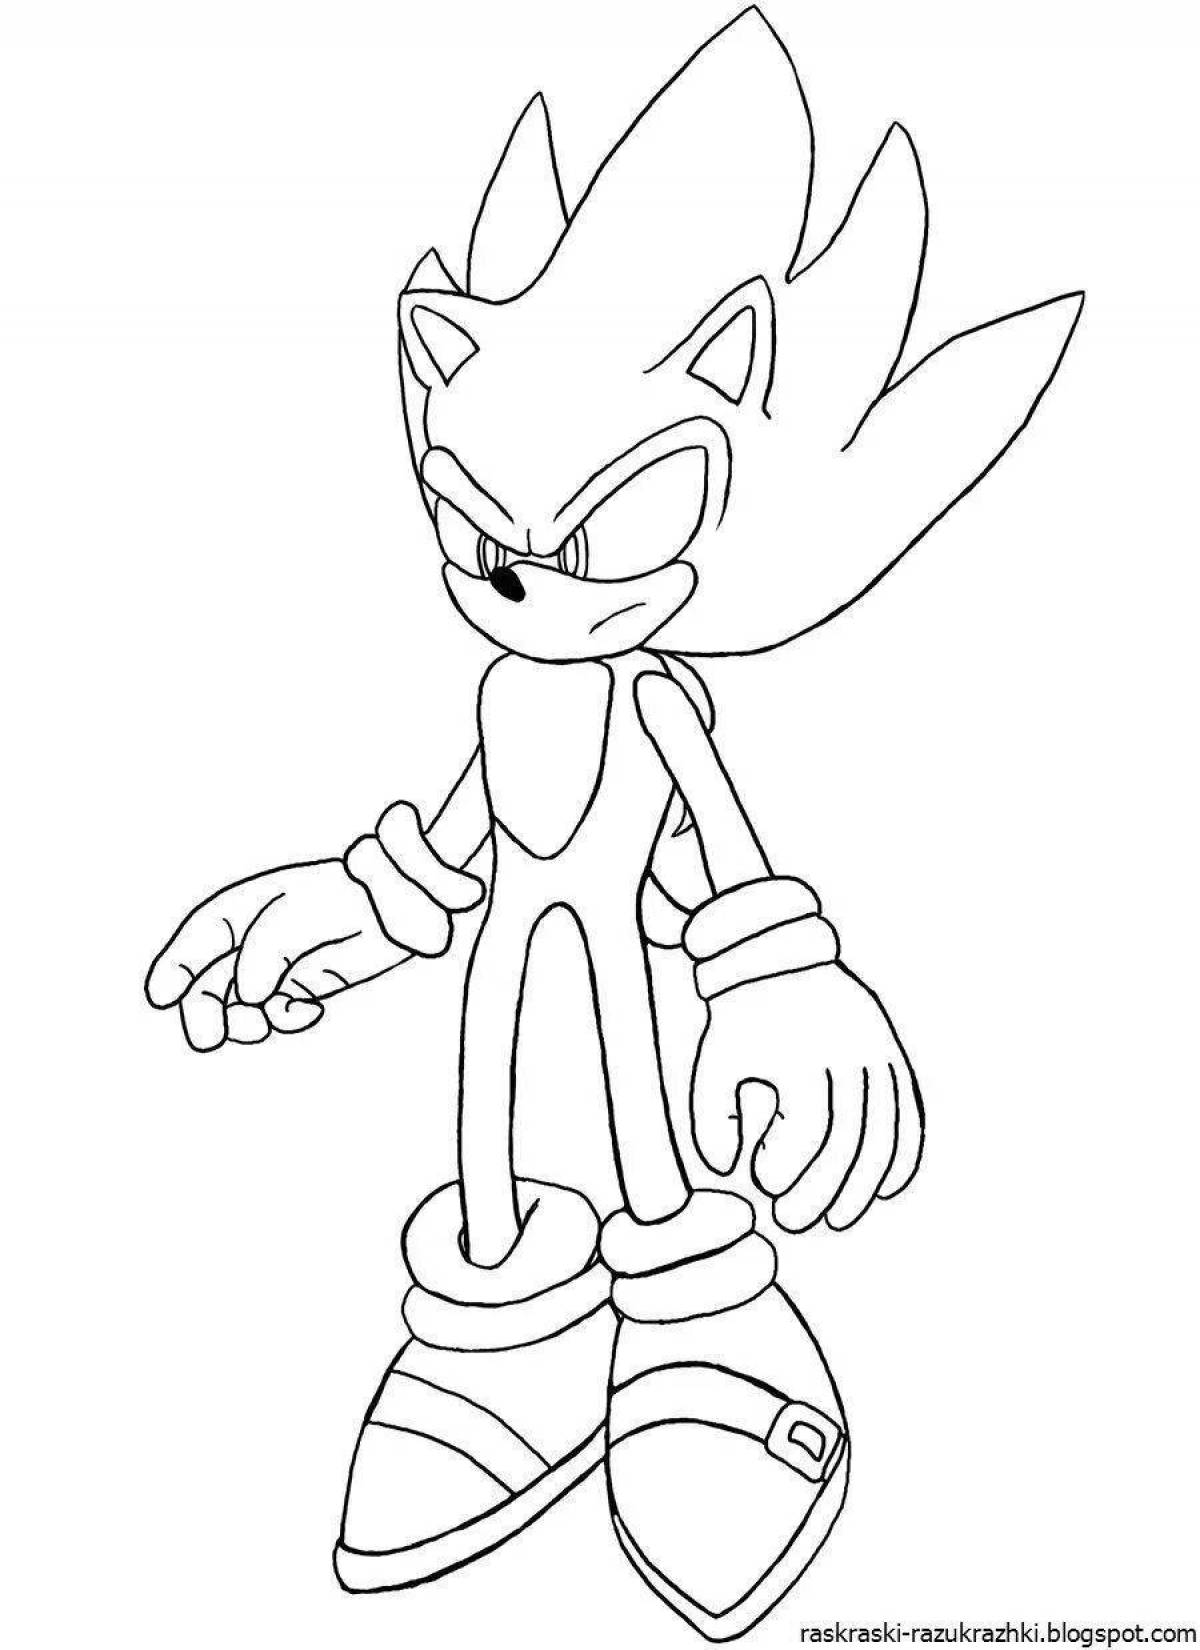 Super sonic exe fat coloring